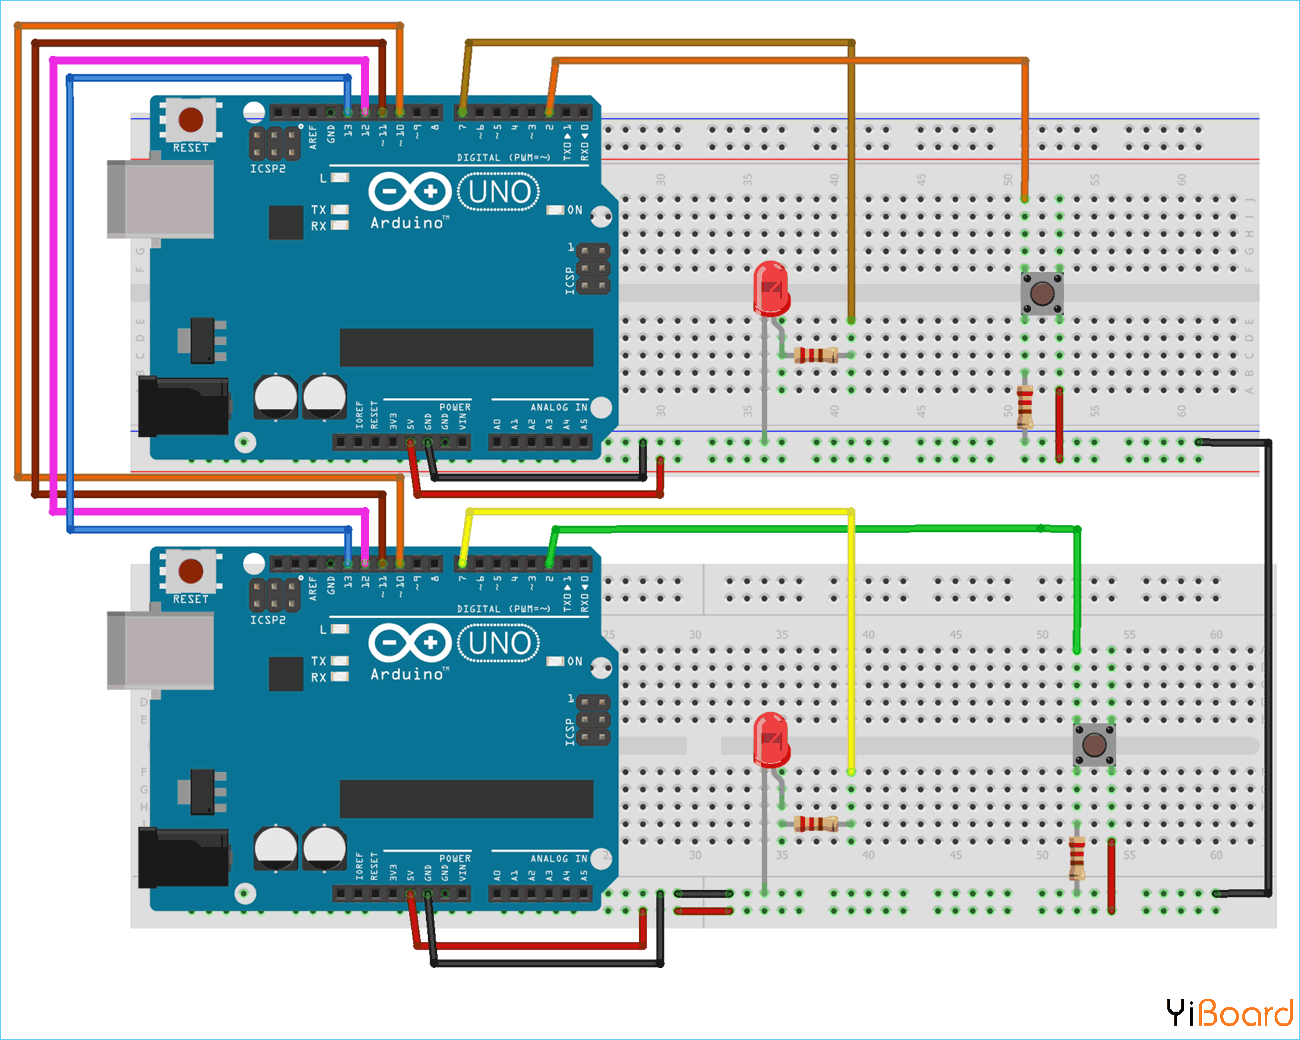 Circuit-Diagram-for-SPI-Communication-between-Two-Arduinos.png